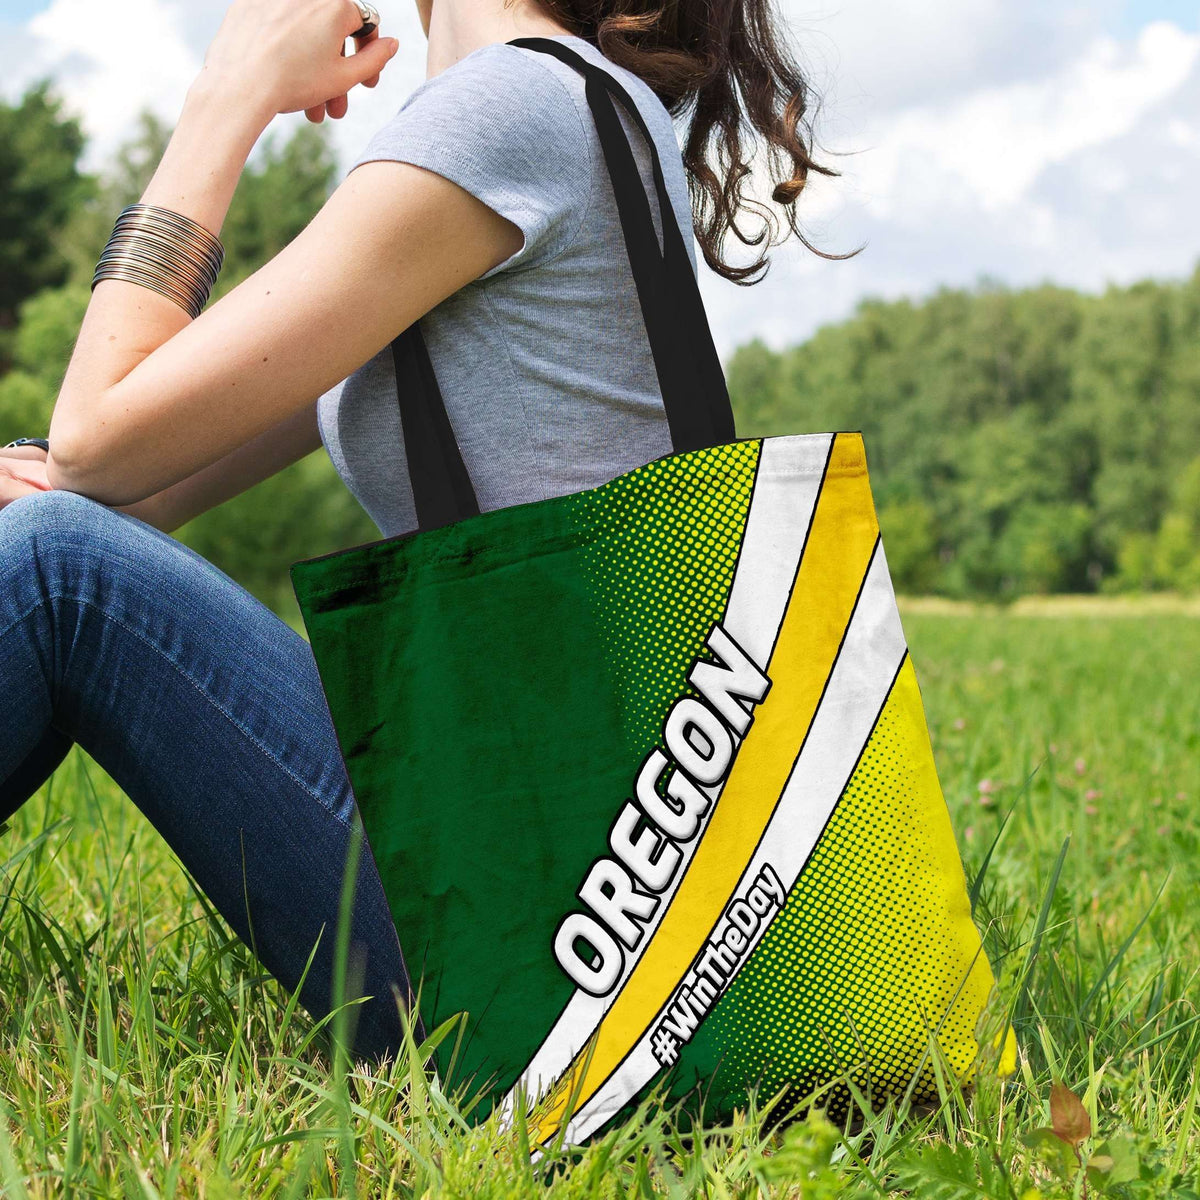 Designs by MyUtopia Shout Out:#WinTheDay Oregon Fan Fabric Totebag Reusable Shopping Tote